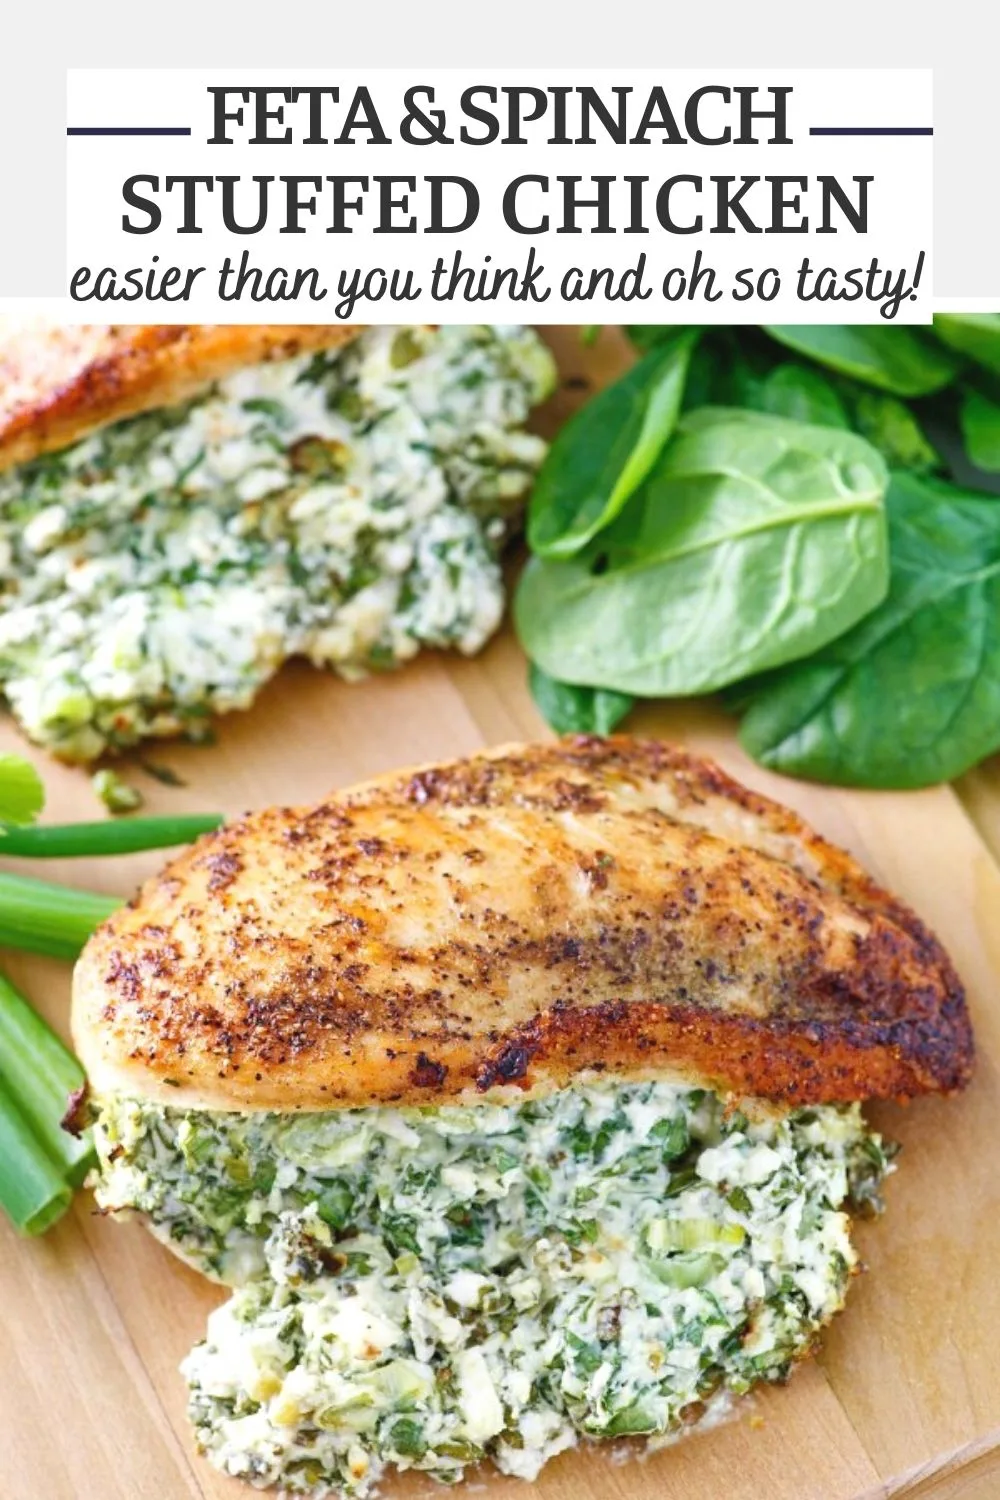 Chicken breasts stuffed with feta and spinach are a perfect dinner entree and they are easier to make than you'd think.  Company will be impressed, but they are quick enough to make for a family dinner as well.